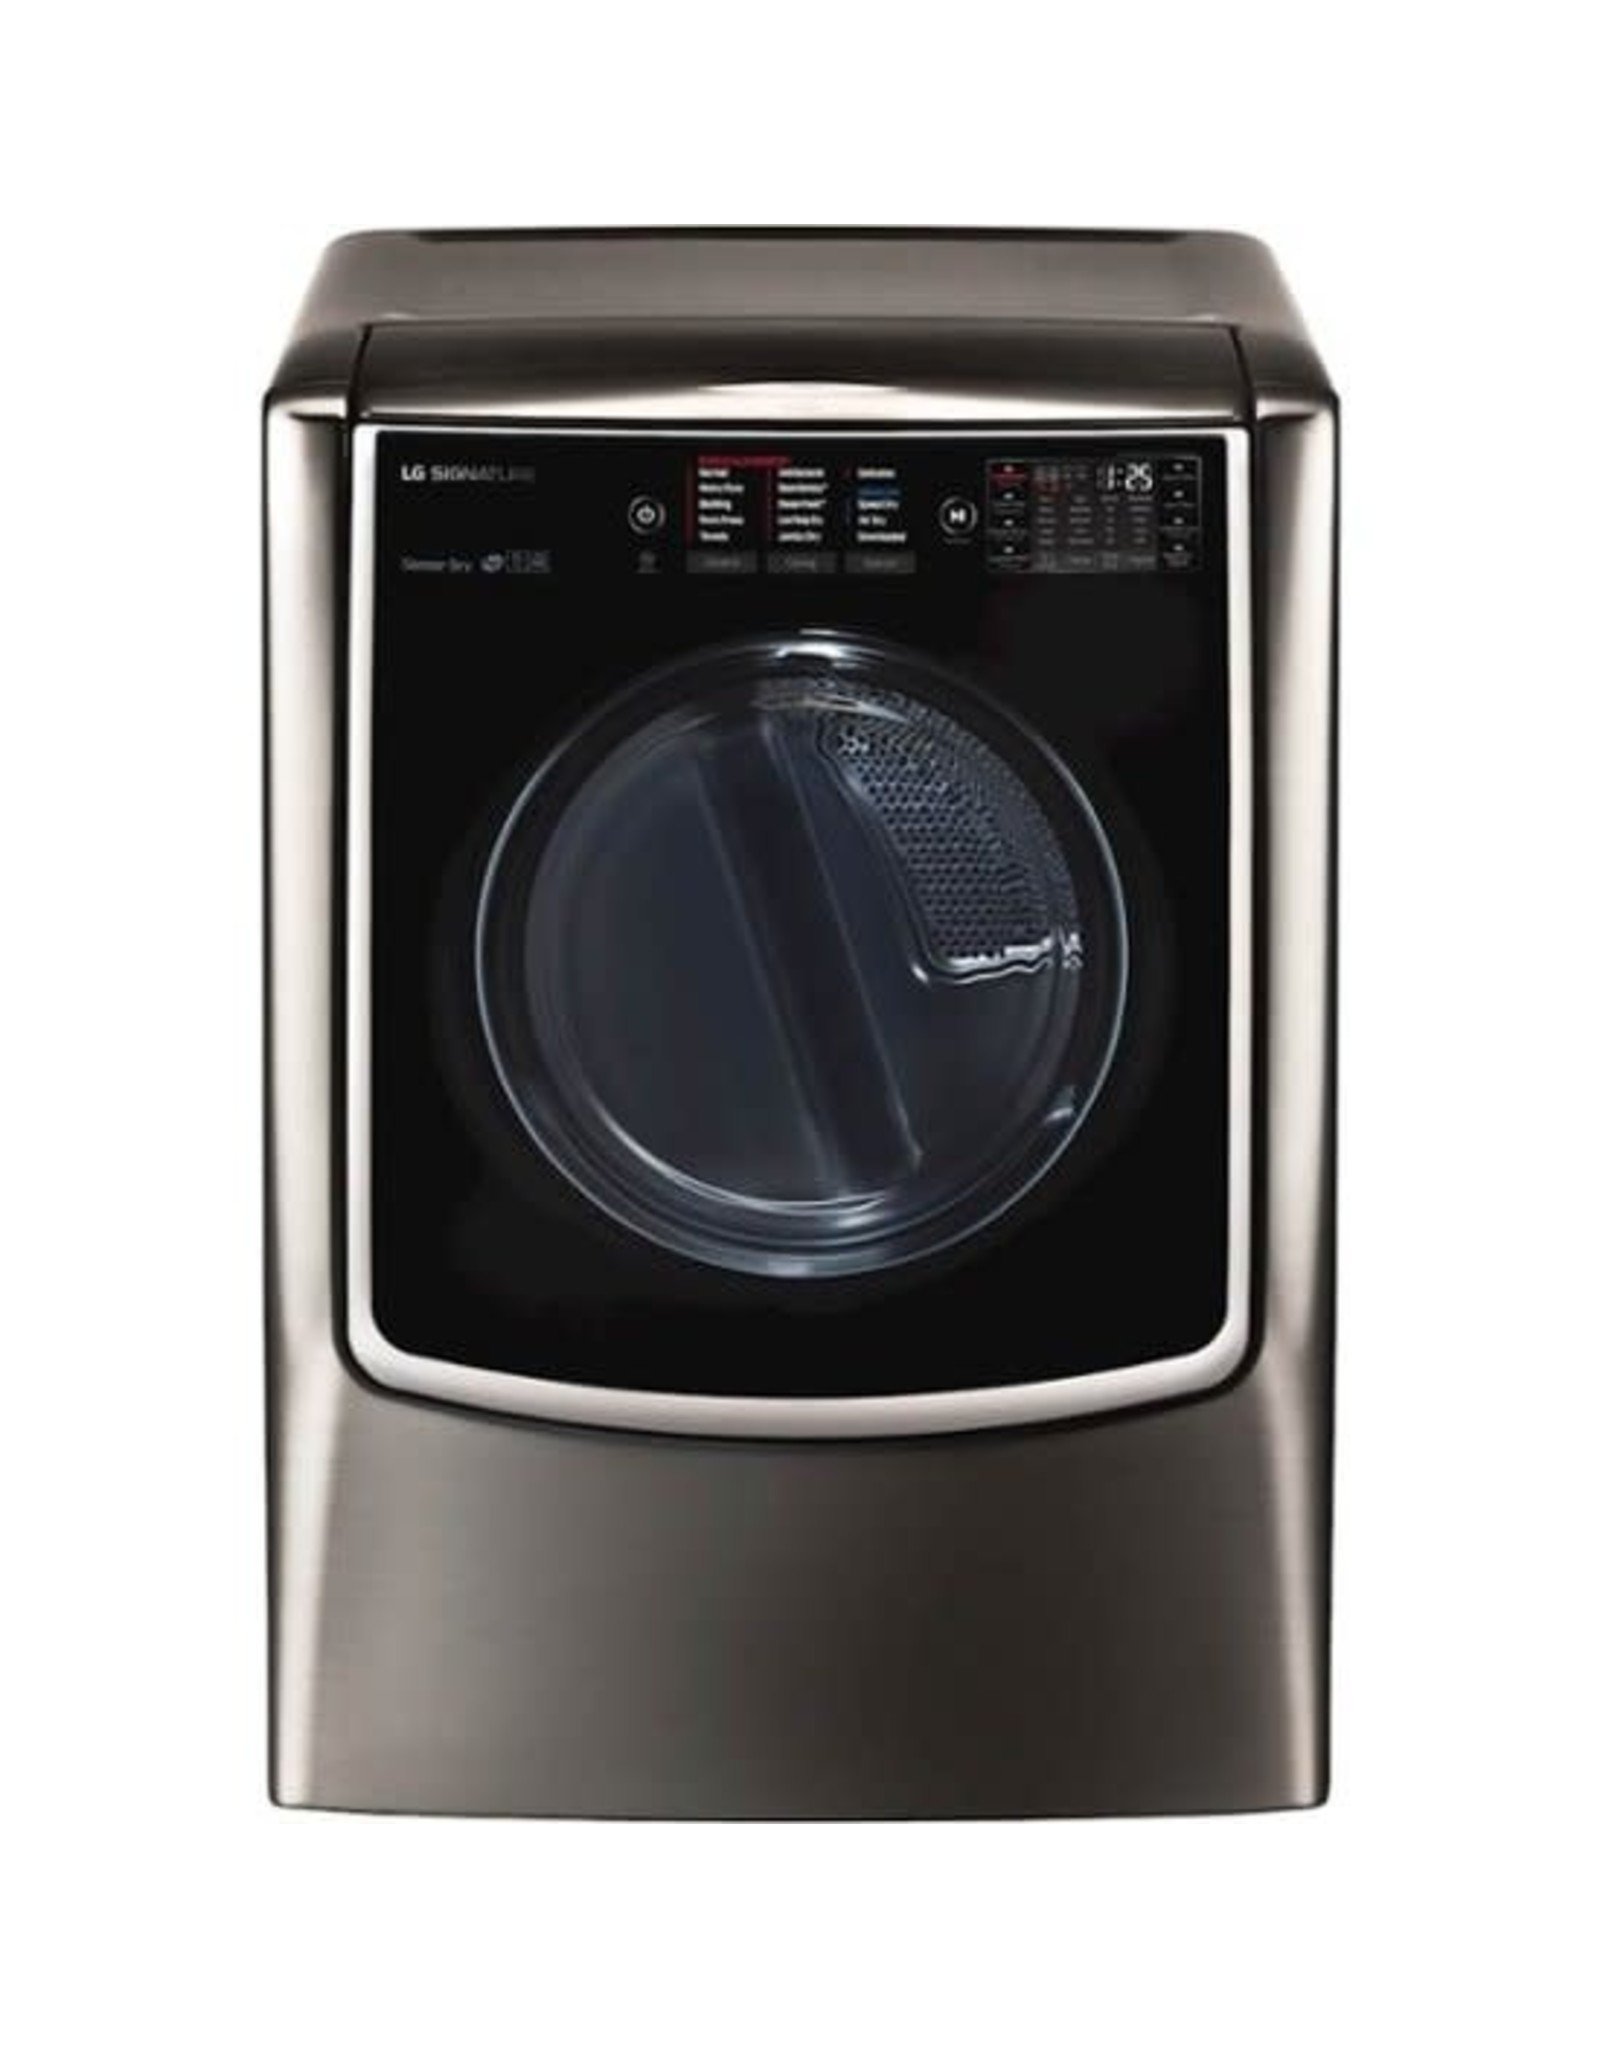 LG Electronics DLGX9501K 9.0 cu. ft. Mega Capacity Smart Front Load Gas Dryer with TurboSteam and Pedestal Compatible in Black Stainless Steel